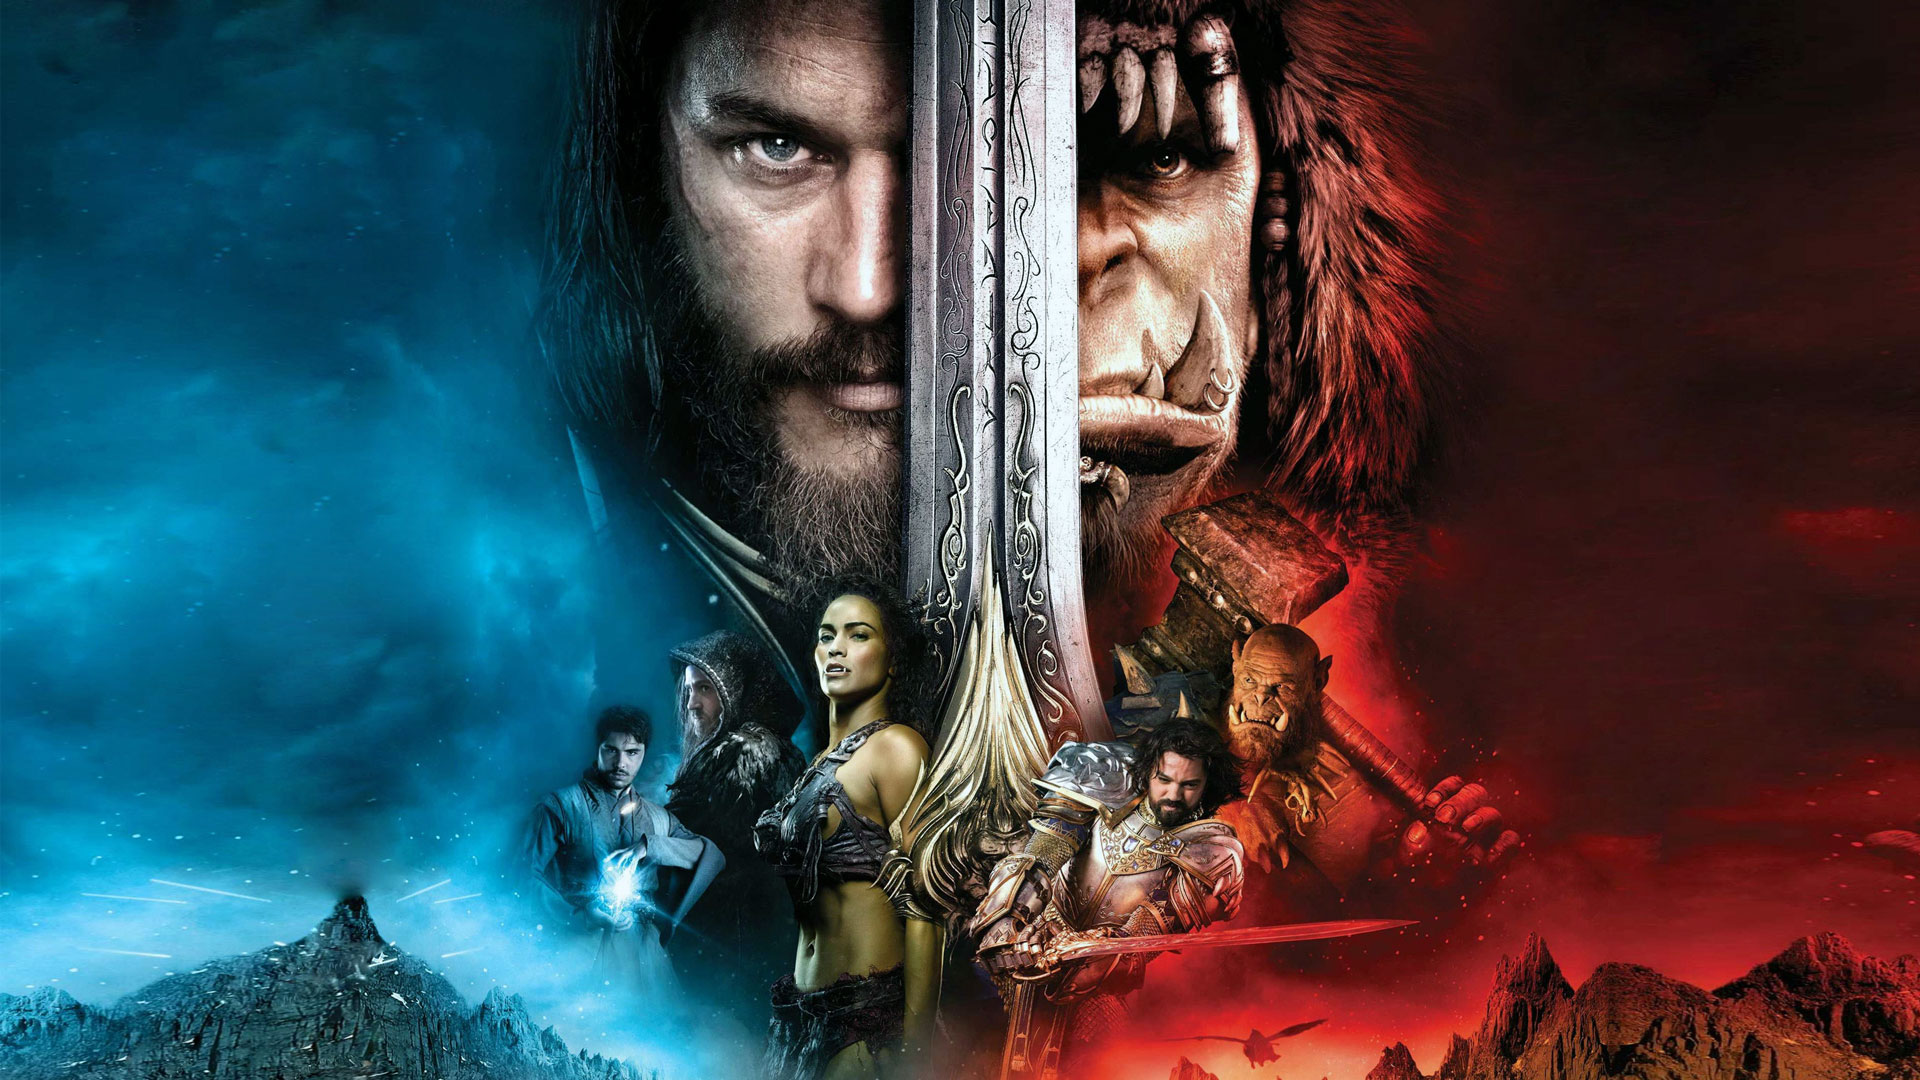 Warcraft movie hd hd movies k wallpapers images backgrounds photos and pictures